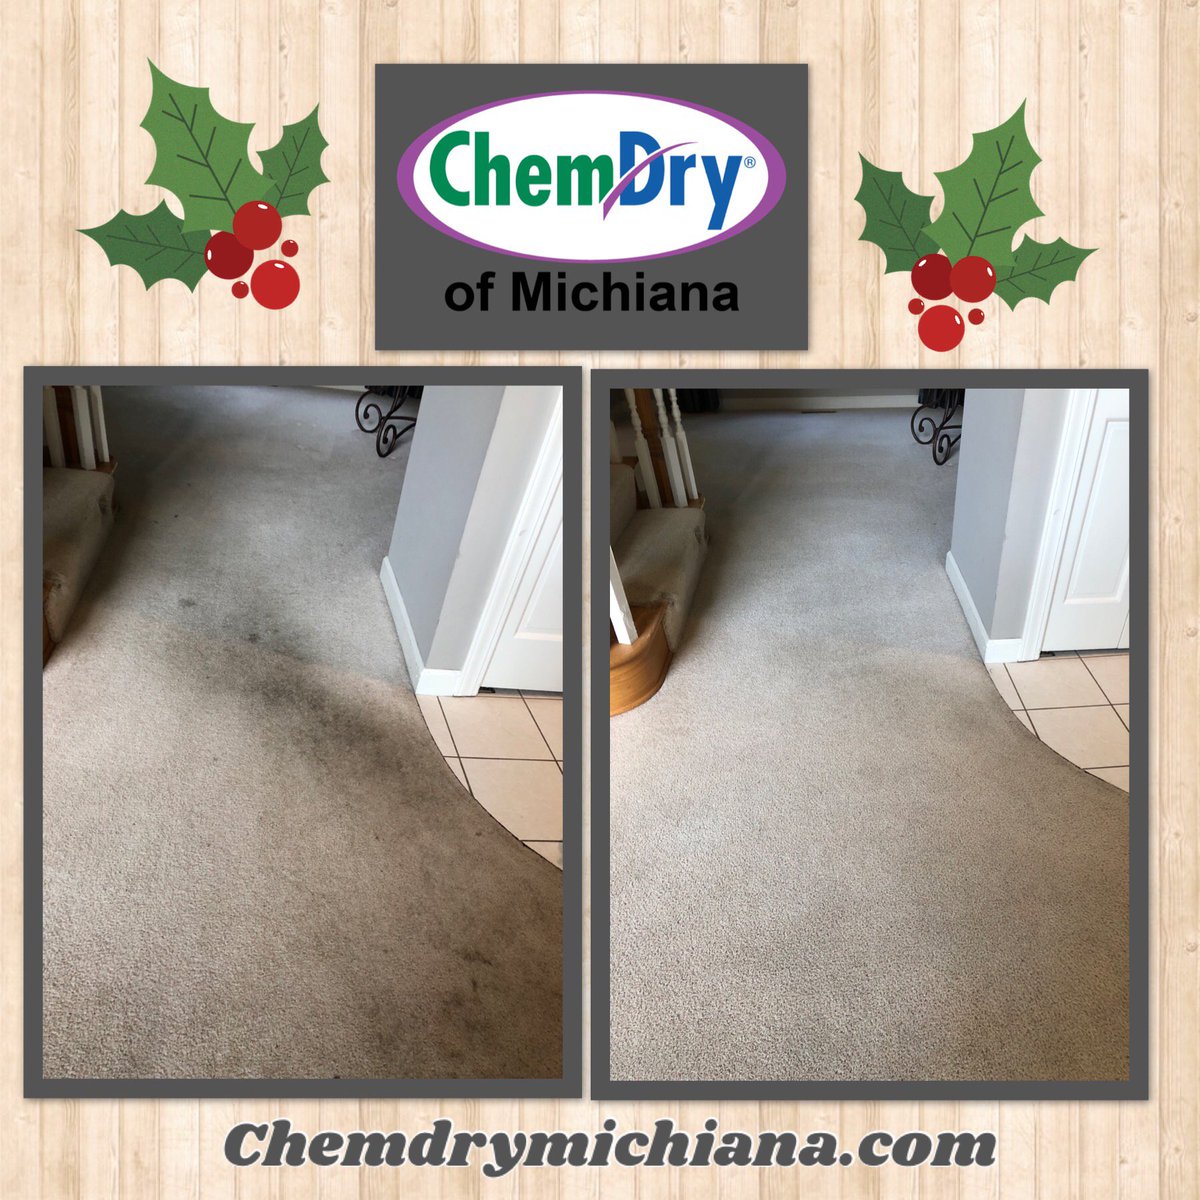 Fabulous Friday Finale #ChemDryCarpetCleaning #CarpetCleaners #ElkhartCarpetCleaners #HealthyHome #GreenCleaning #HolidayCleaning